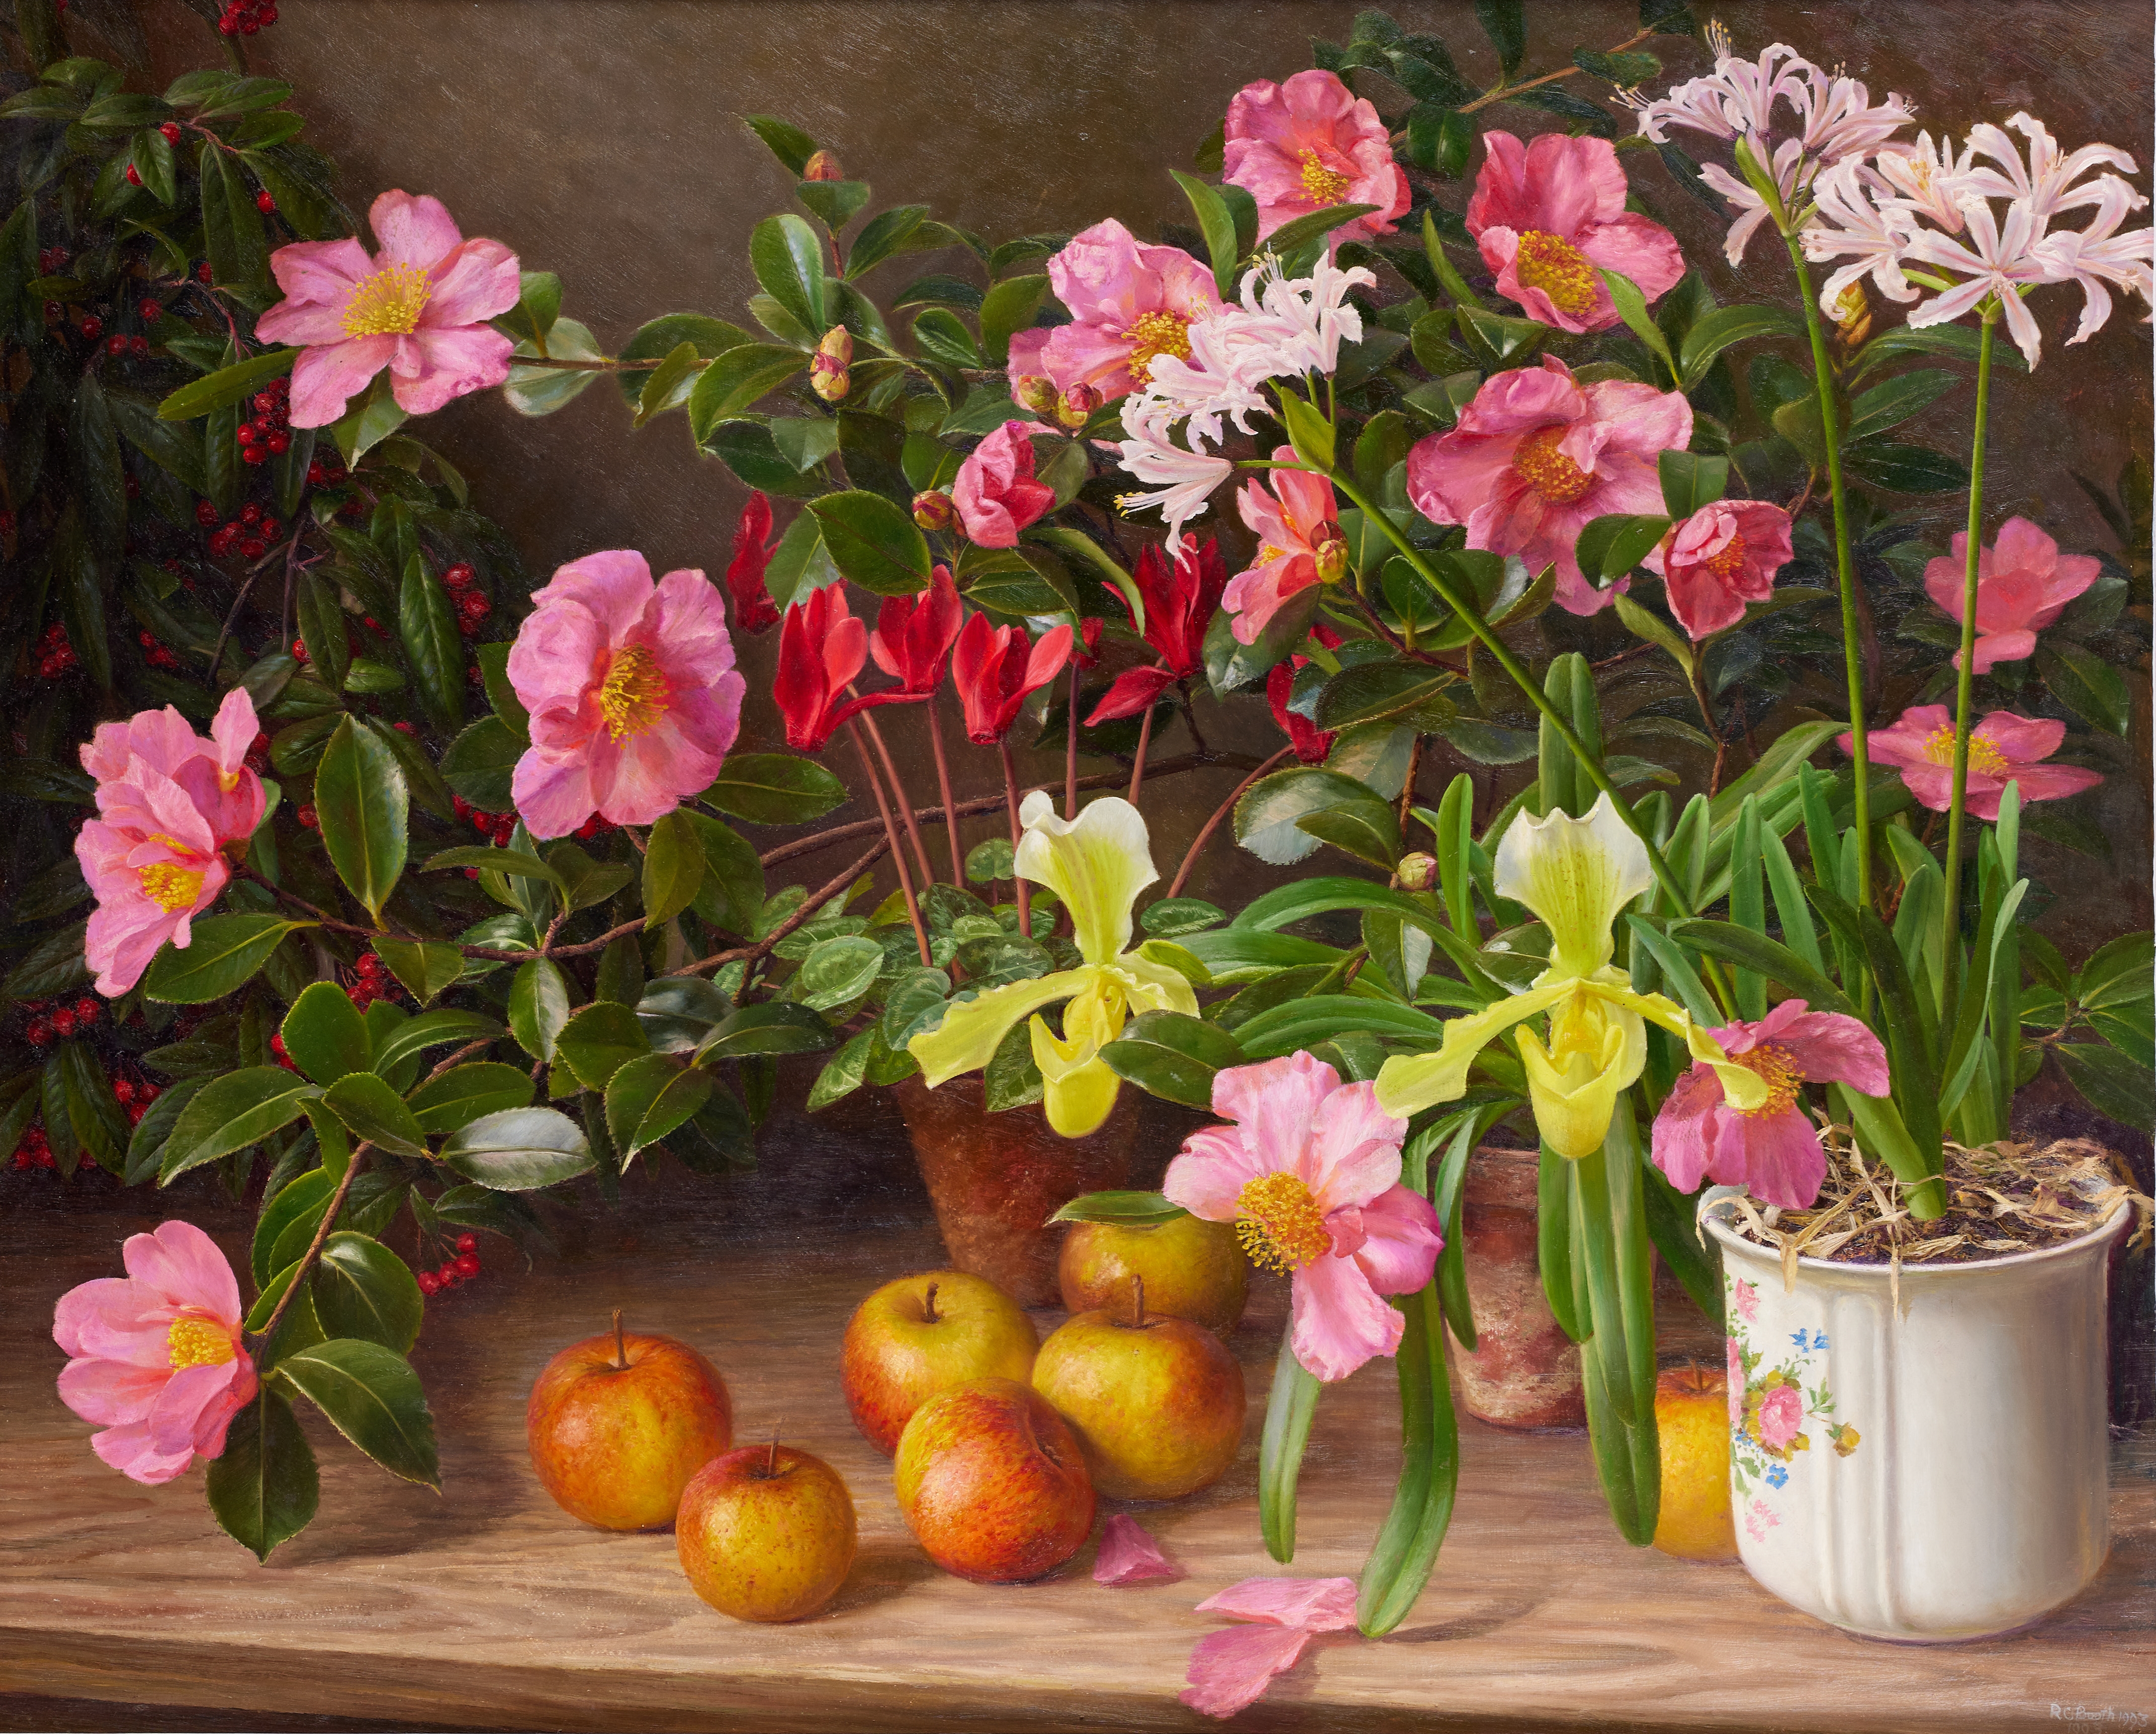 “Camellia, Cyclamen and other Flowers” by Raymond Booth, 1993